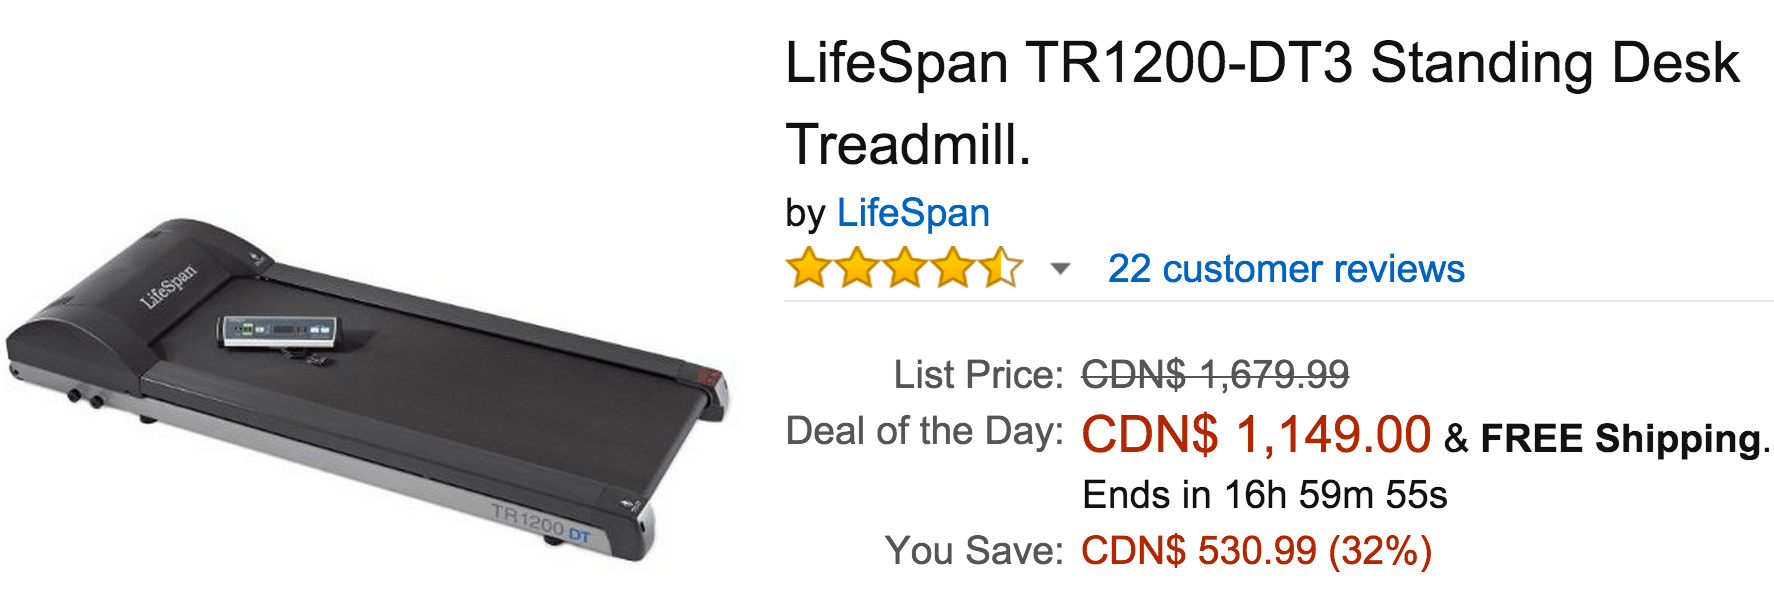 Amazon Canada Deals Of The Day Save 32 On Lifespan Tr1200 Dt3